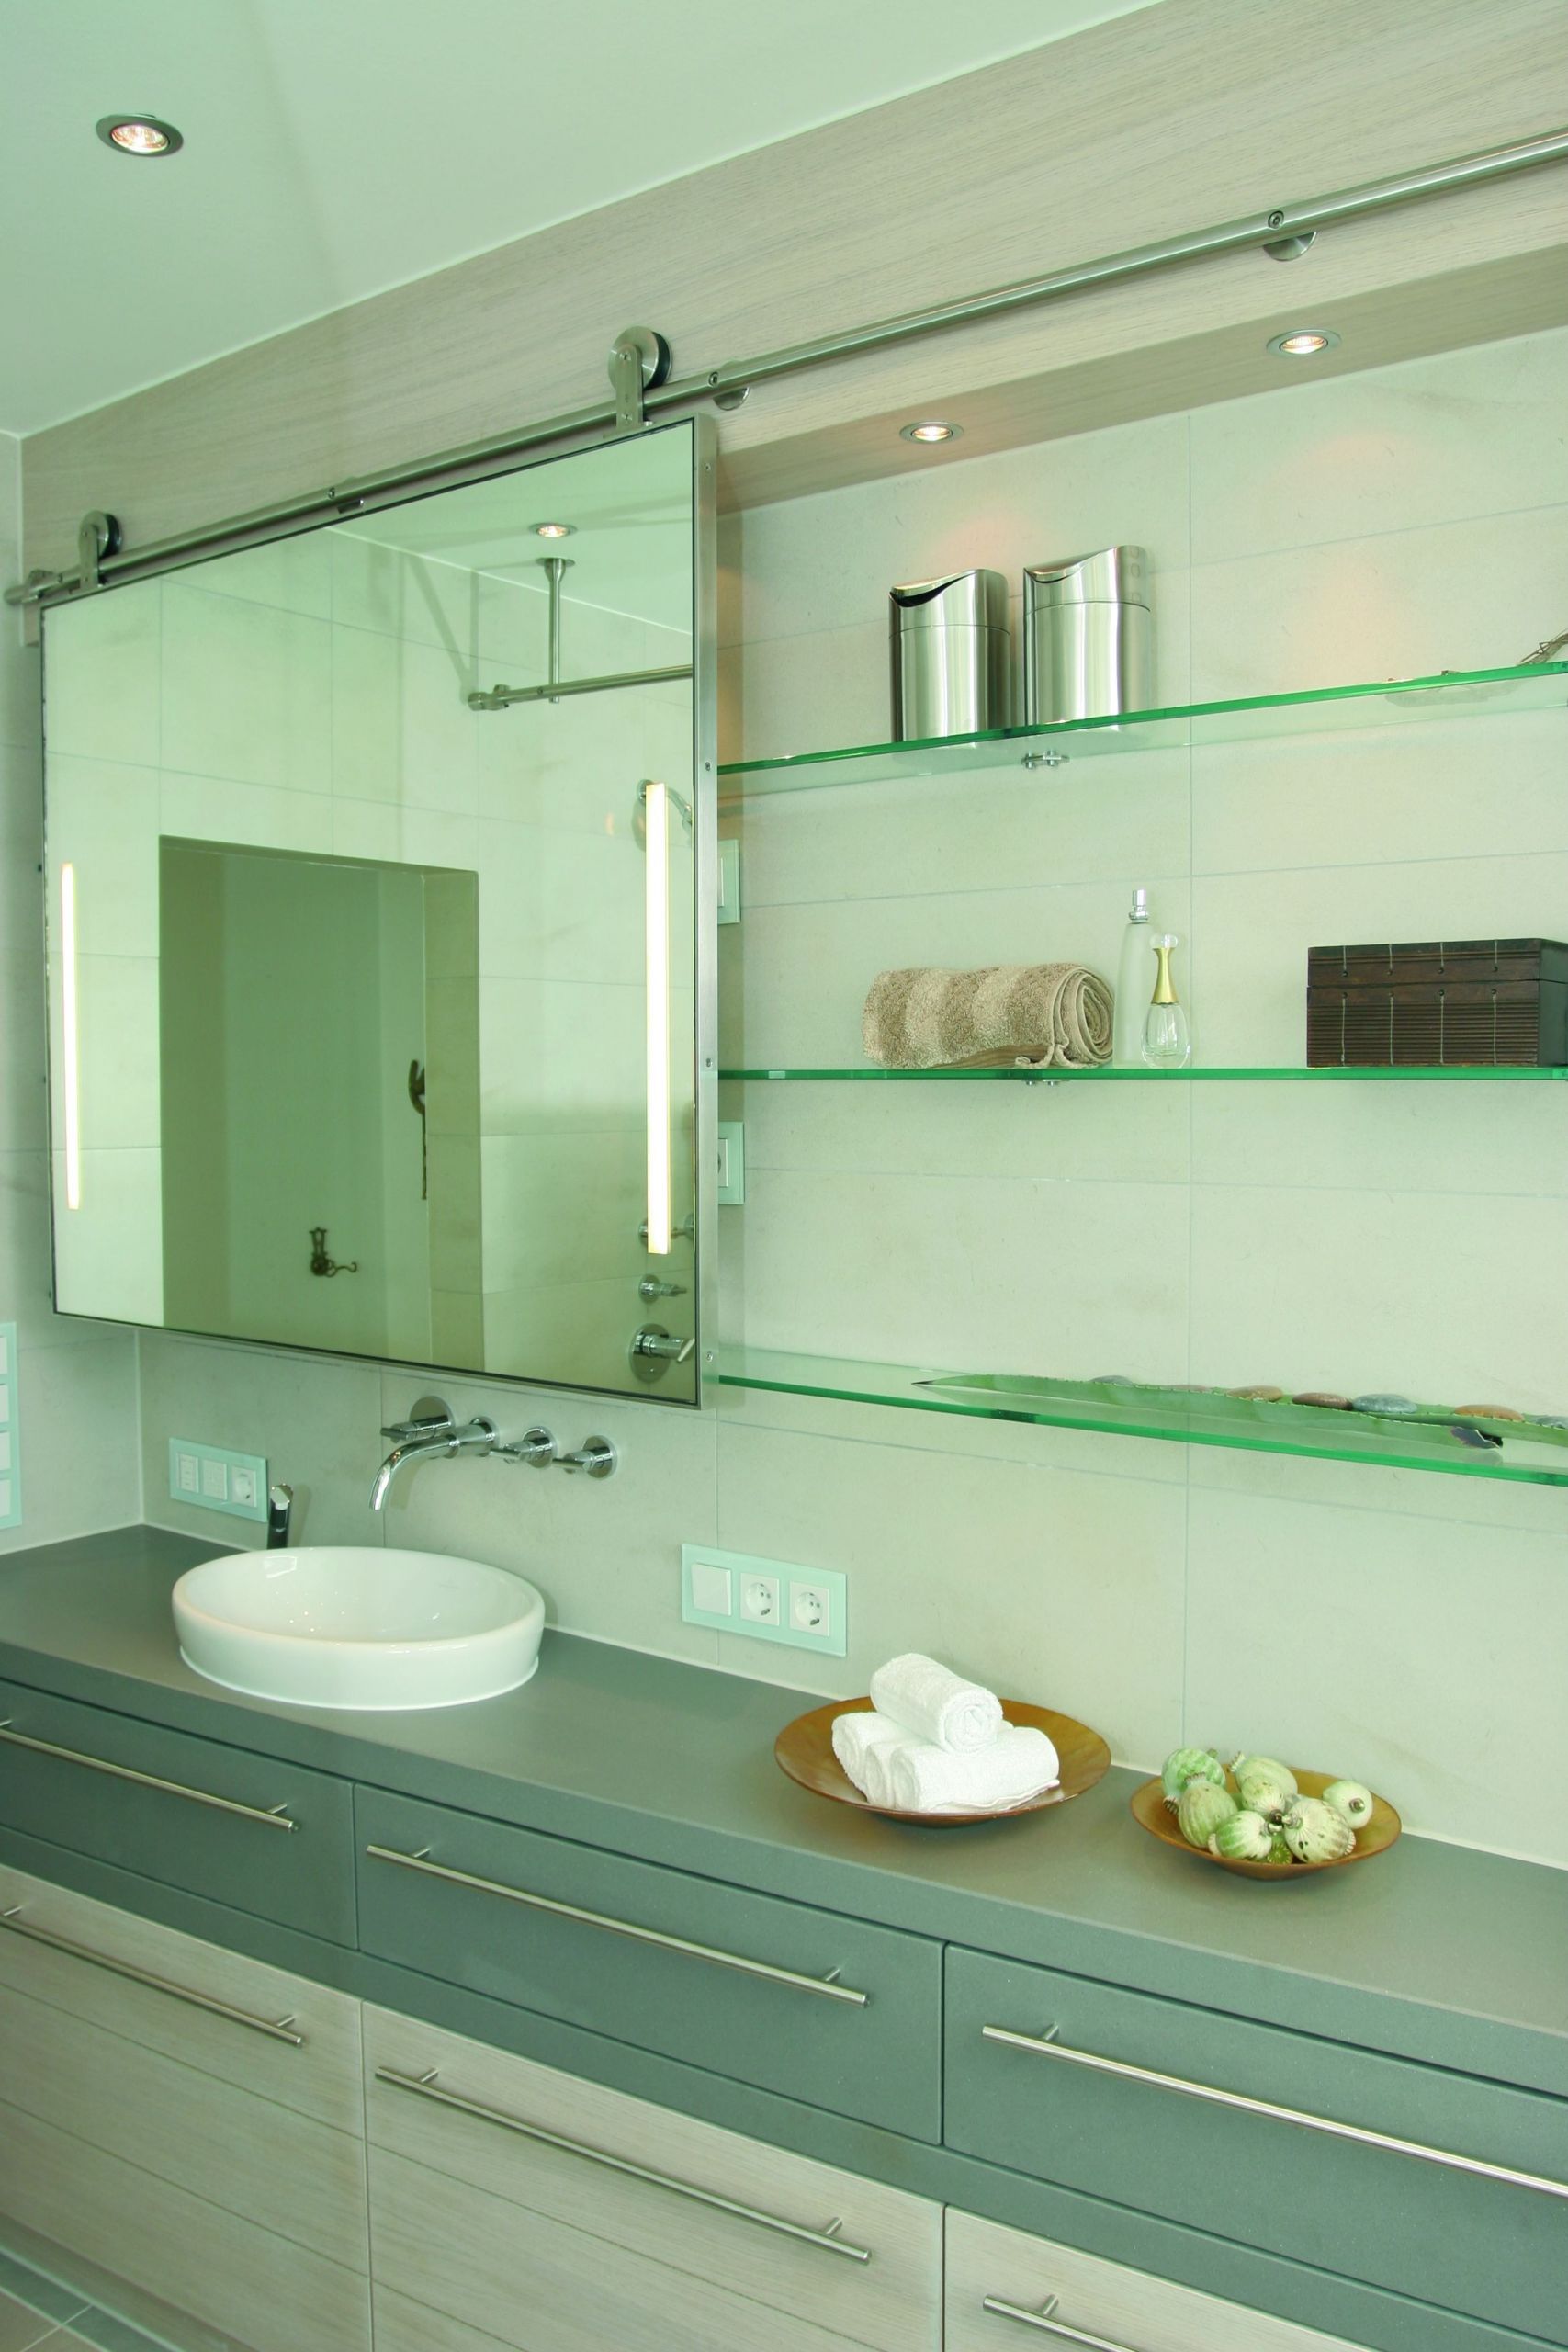 Large Bathroom Mirror Cabinet
 Pin by Richard Cone on Master bathroom layout